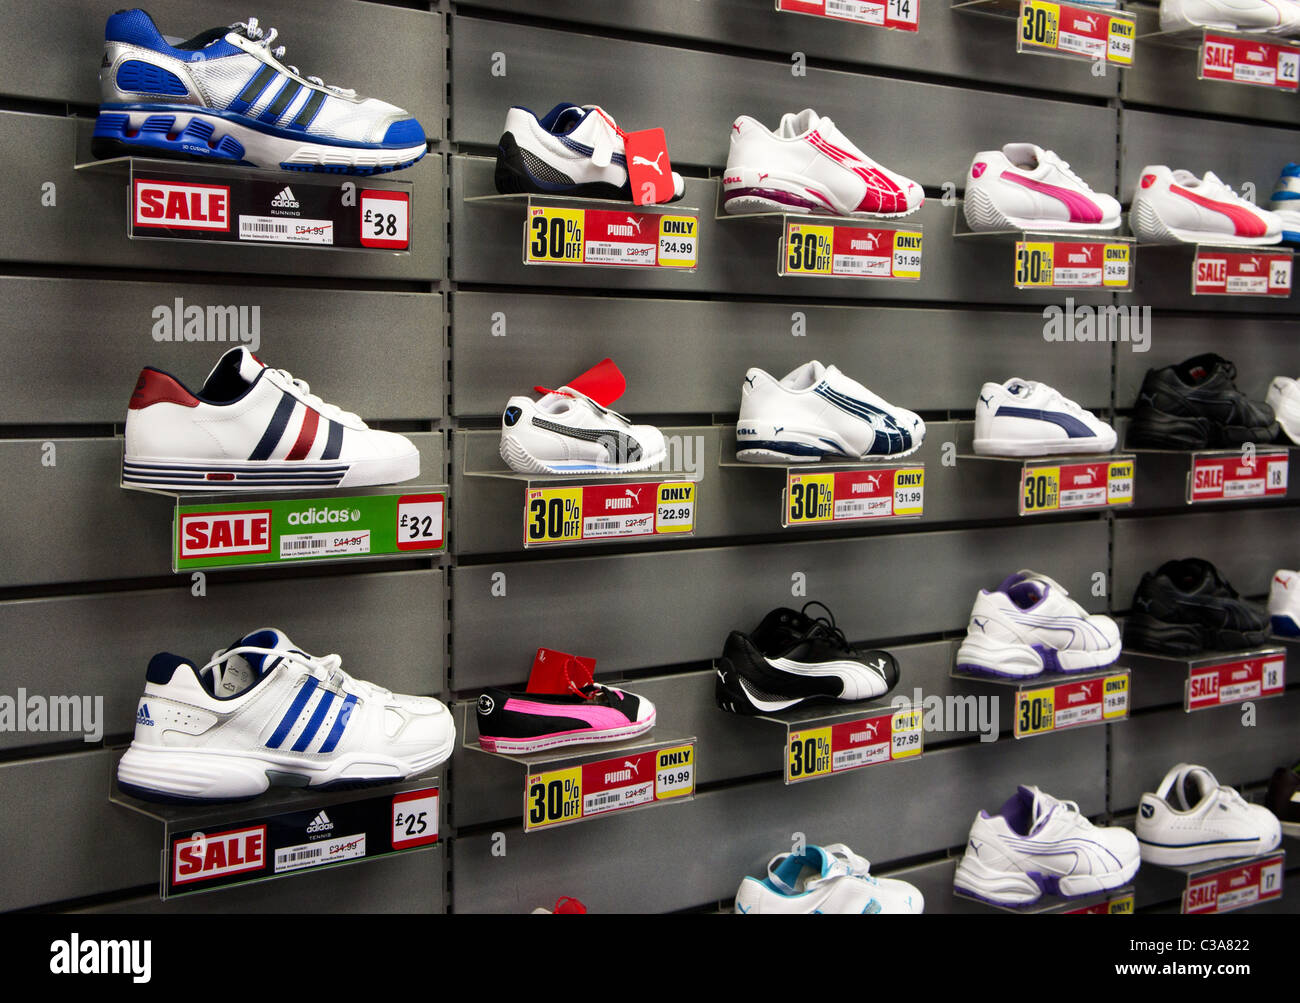 Running shoes on sale in a sporting goods store, uk Stock Photo